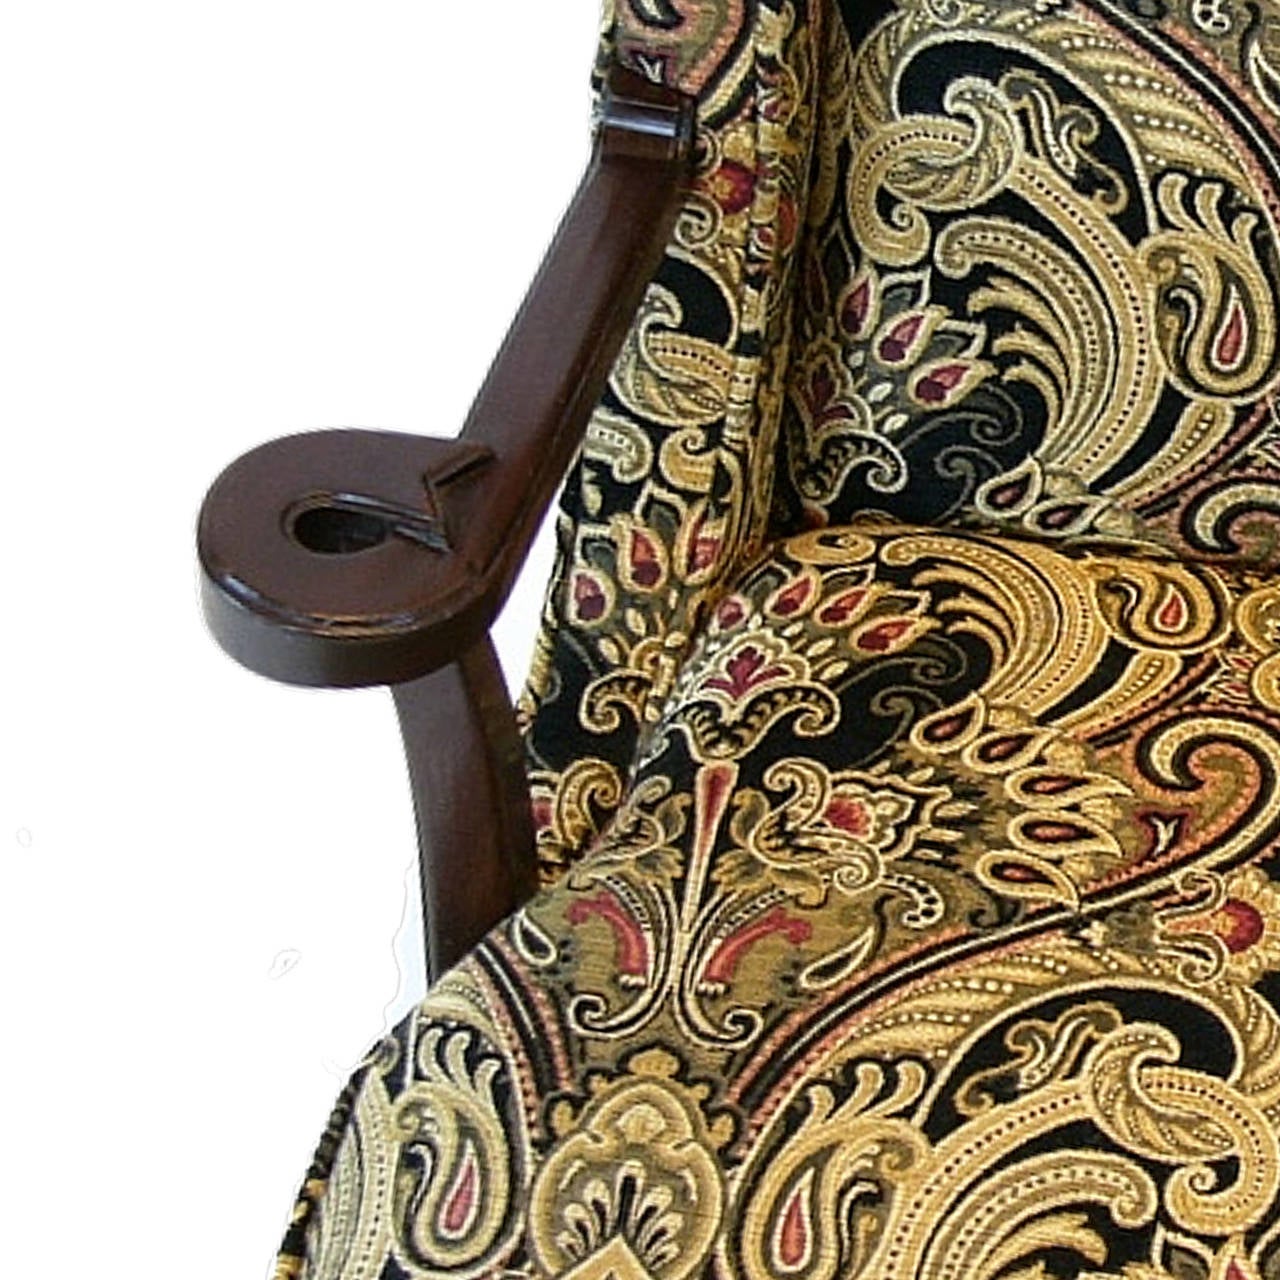 Stained Pair of Tommi Parzinger Chairs with Tapestry Upholstery for Charak